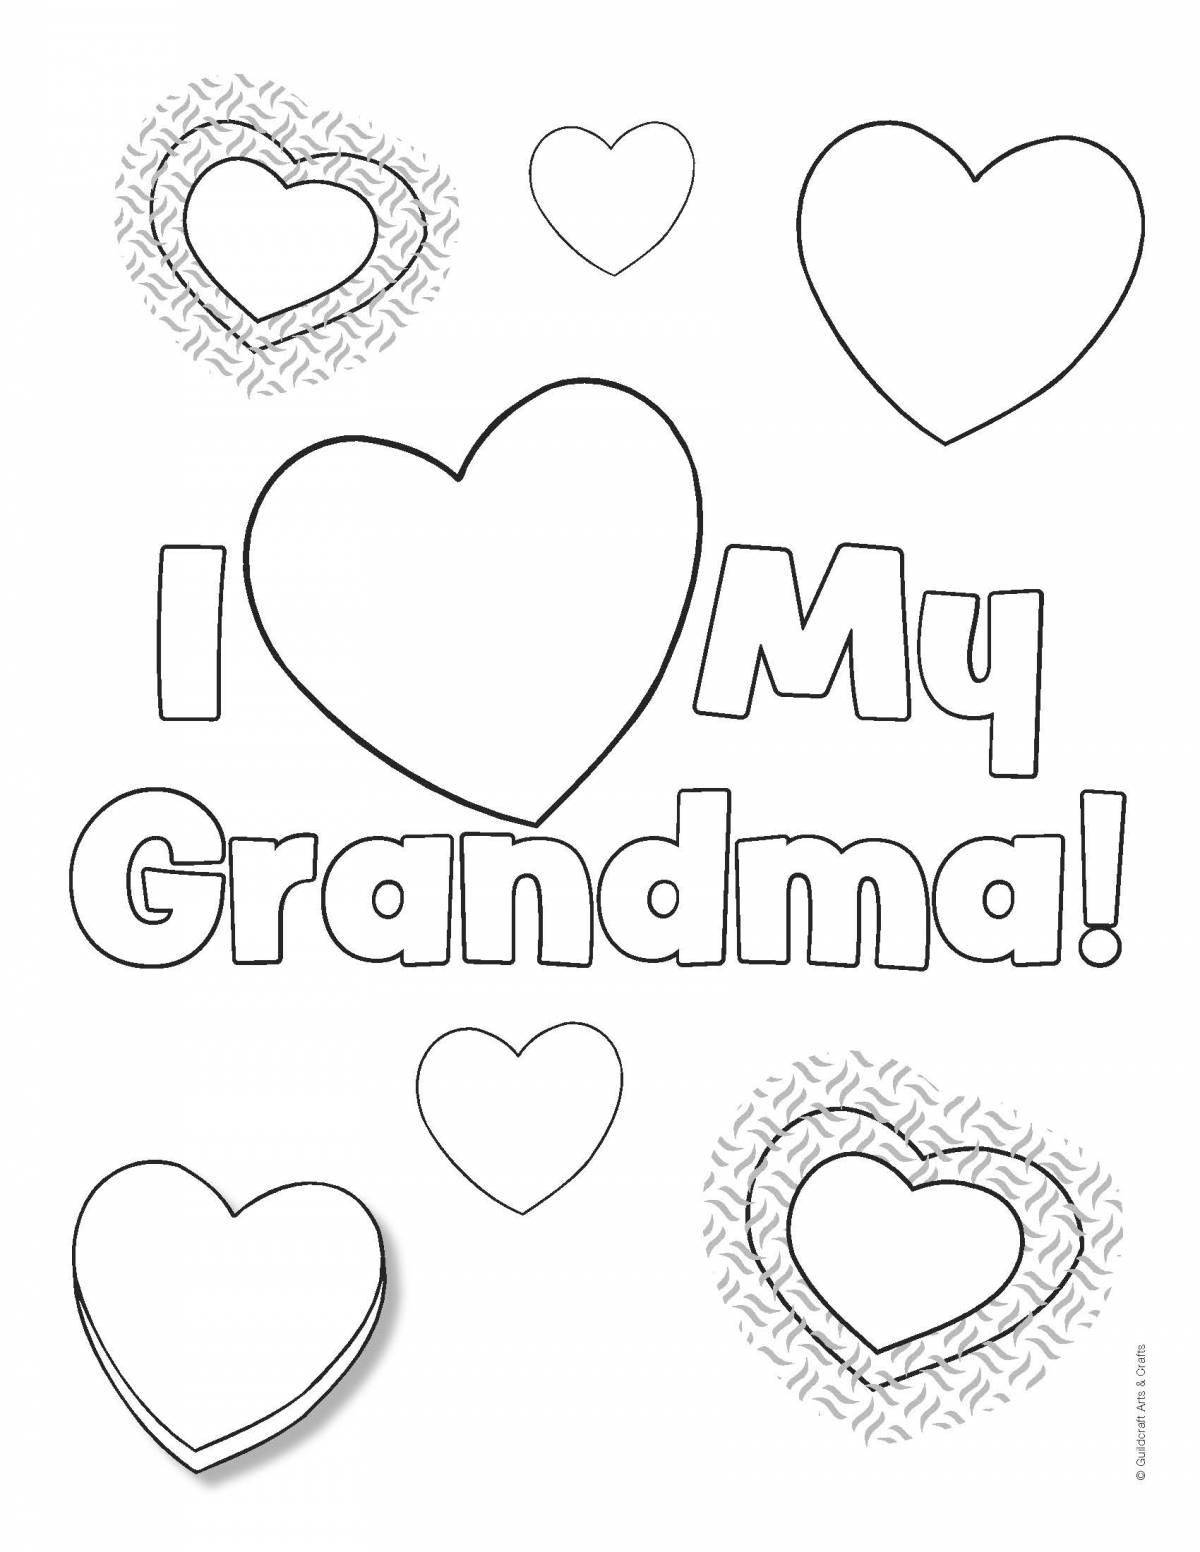 Blessed greeting card for grandma from grandson